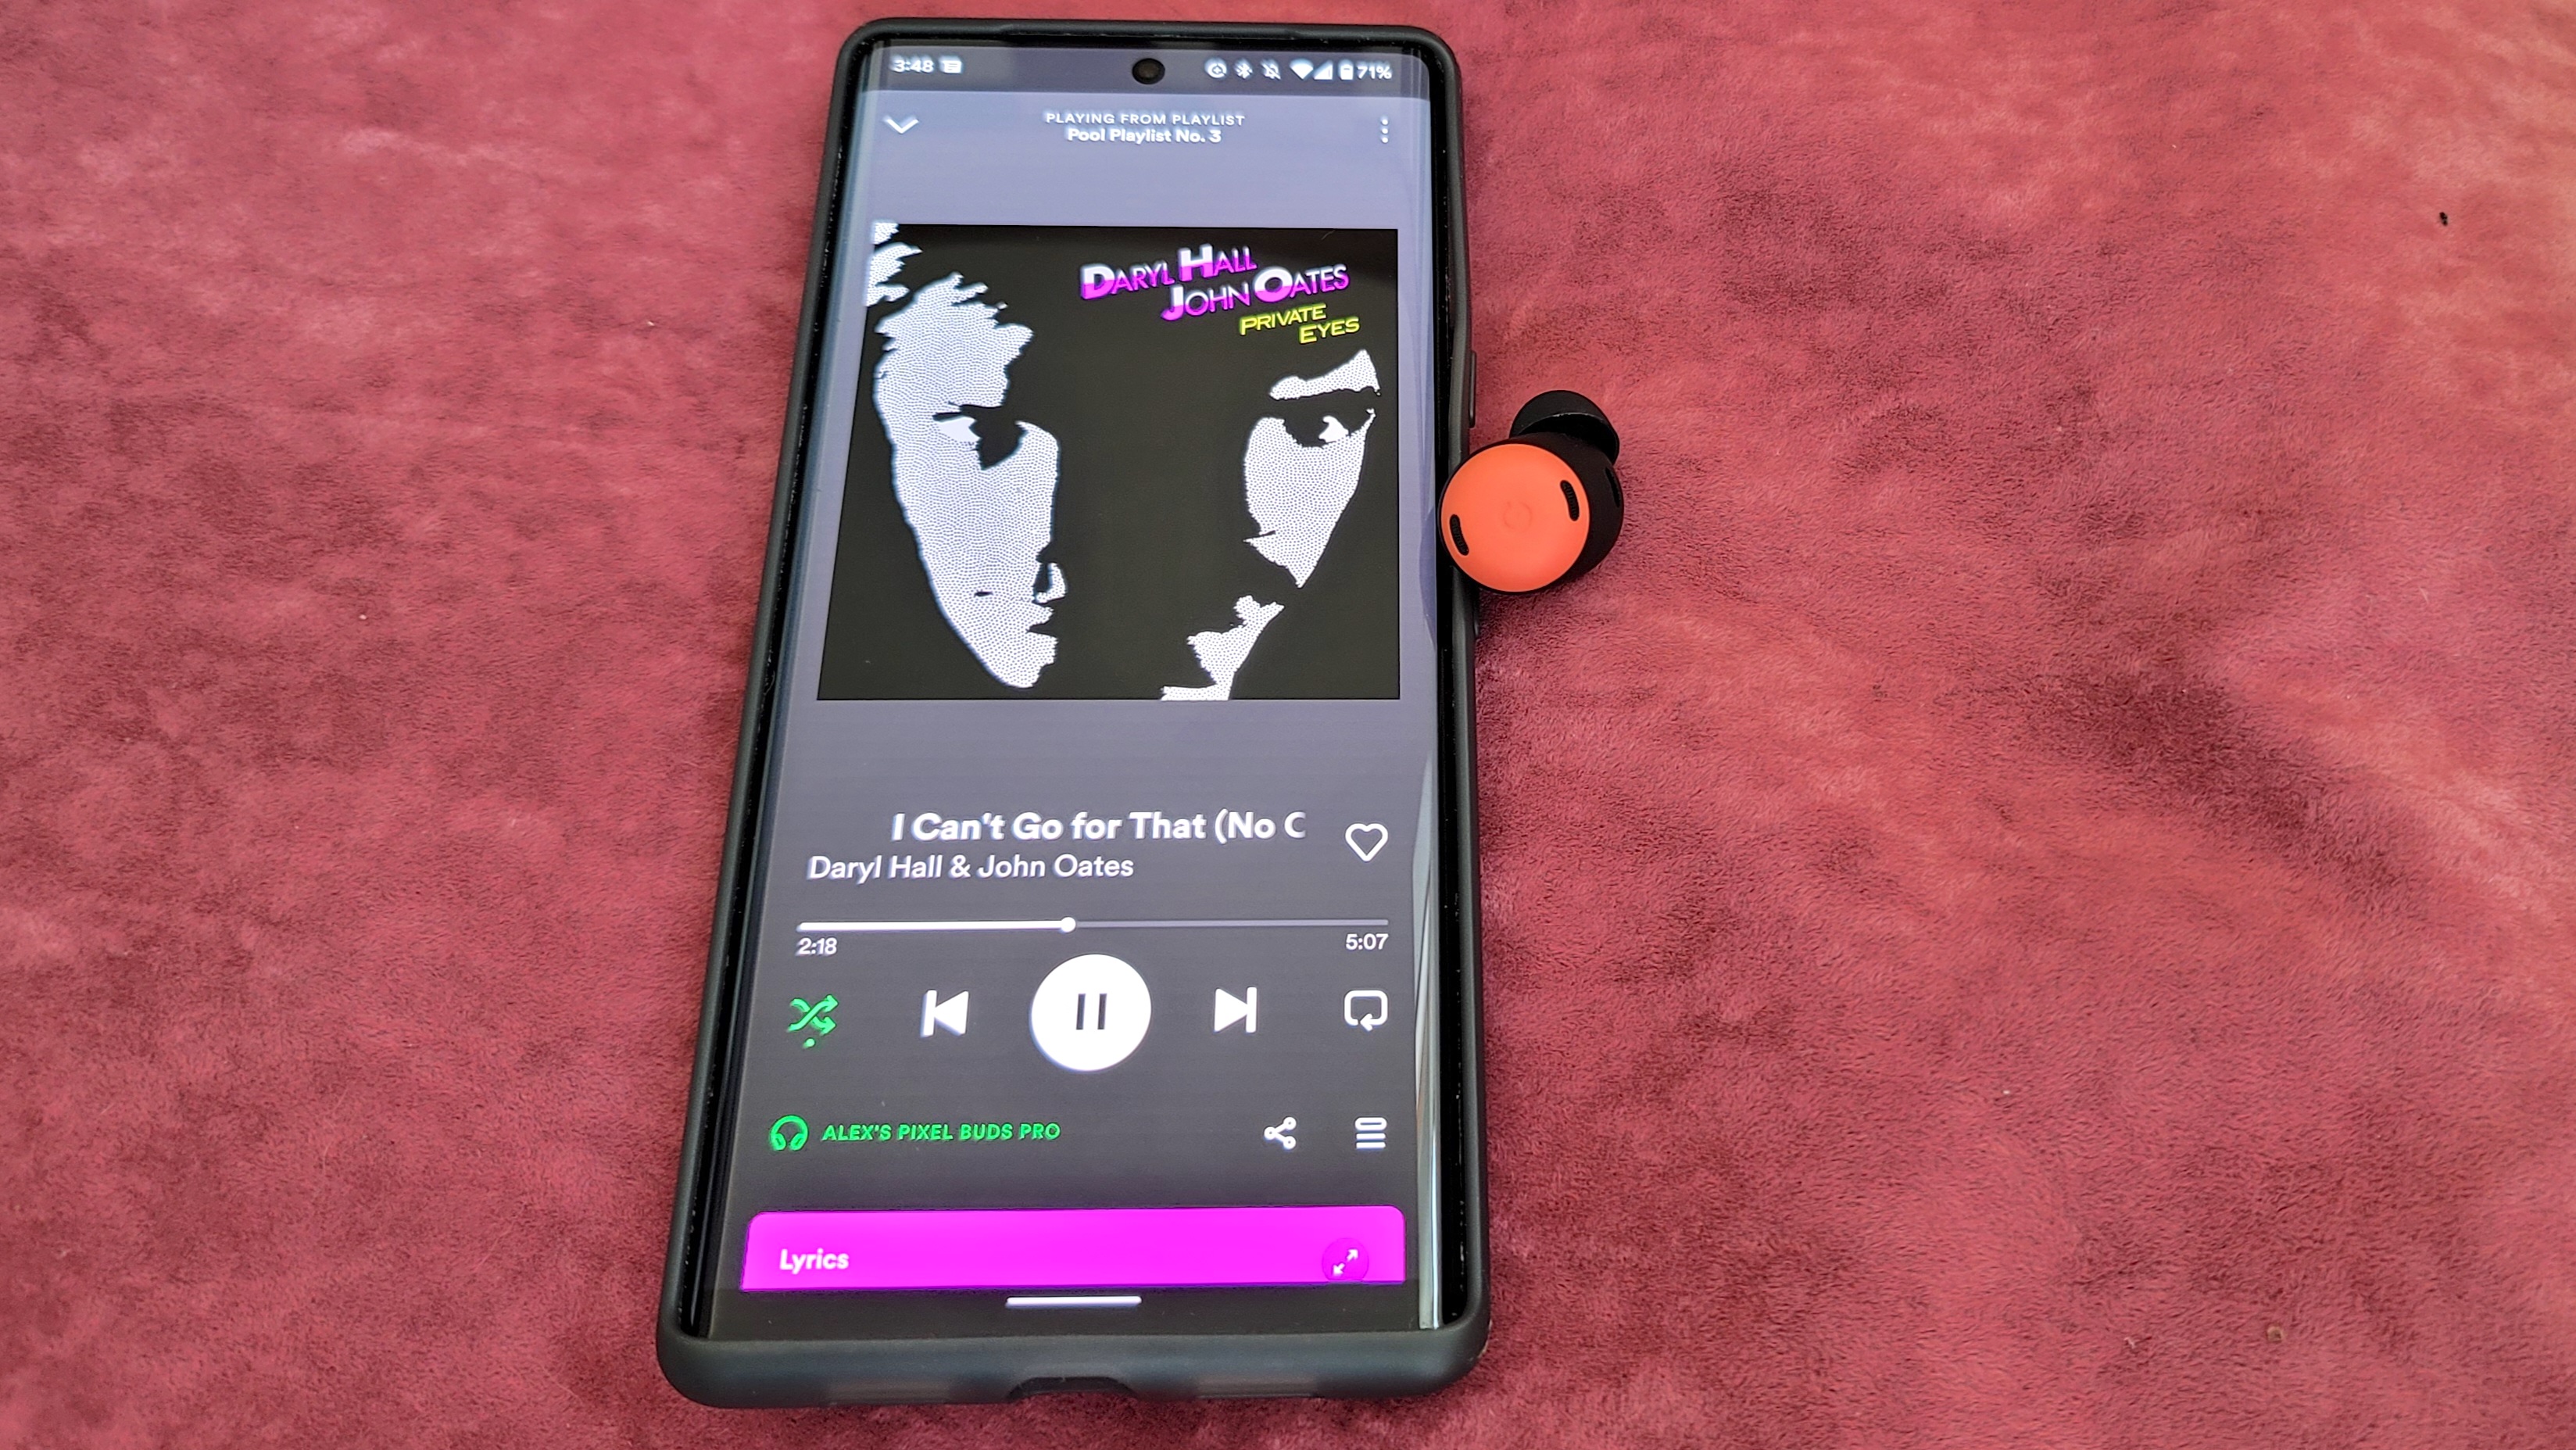 The Google Pixel Buds Pro 2 playing Hall & Oates "I Can't Go For That" during our testing